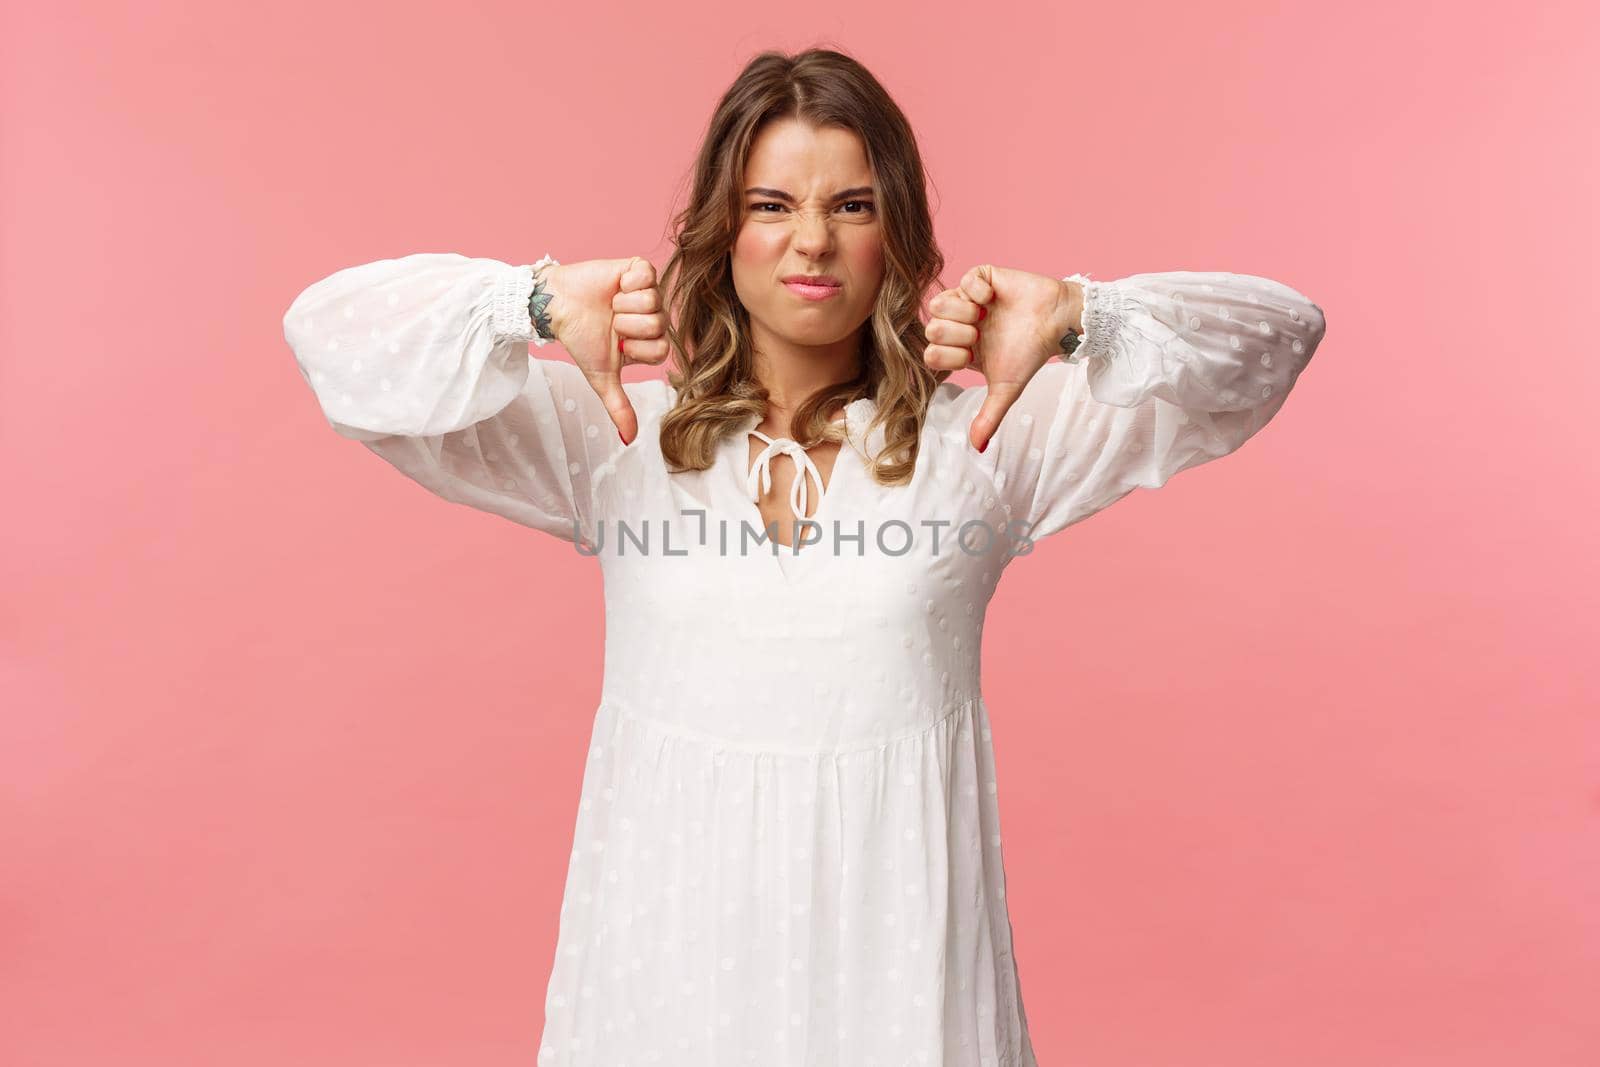 Portrait of picky young blond caucasian woman in white dress over pink background expressing dislike, show thumbs-down and grimacing in aversion, disappointed with bad quality.